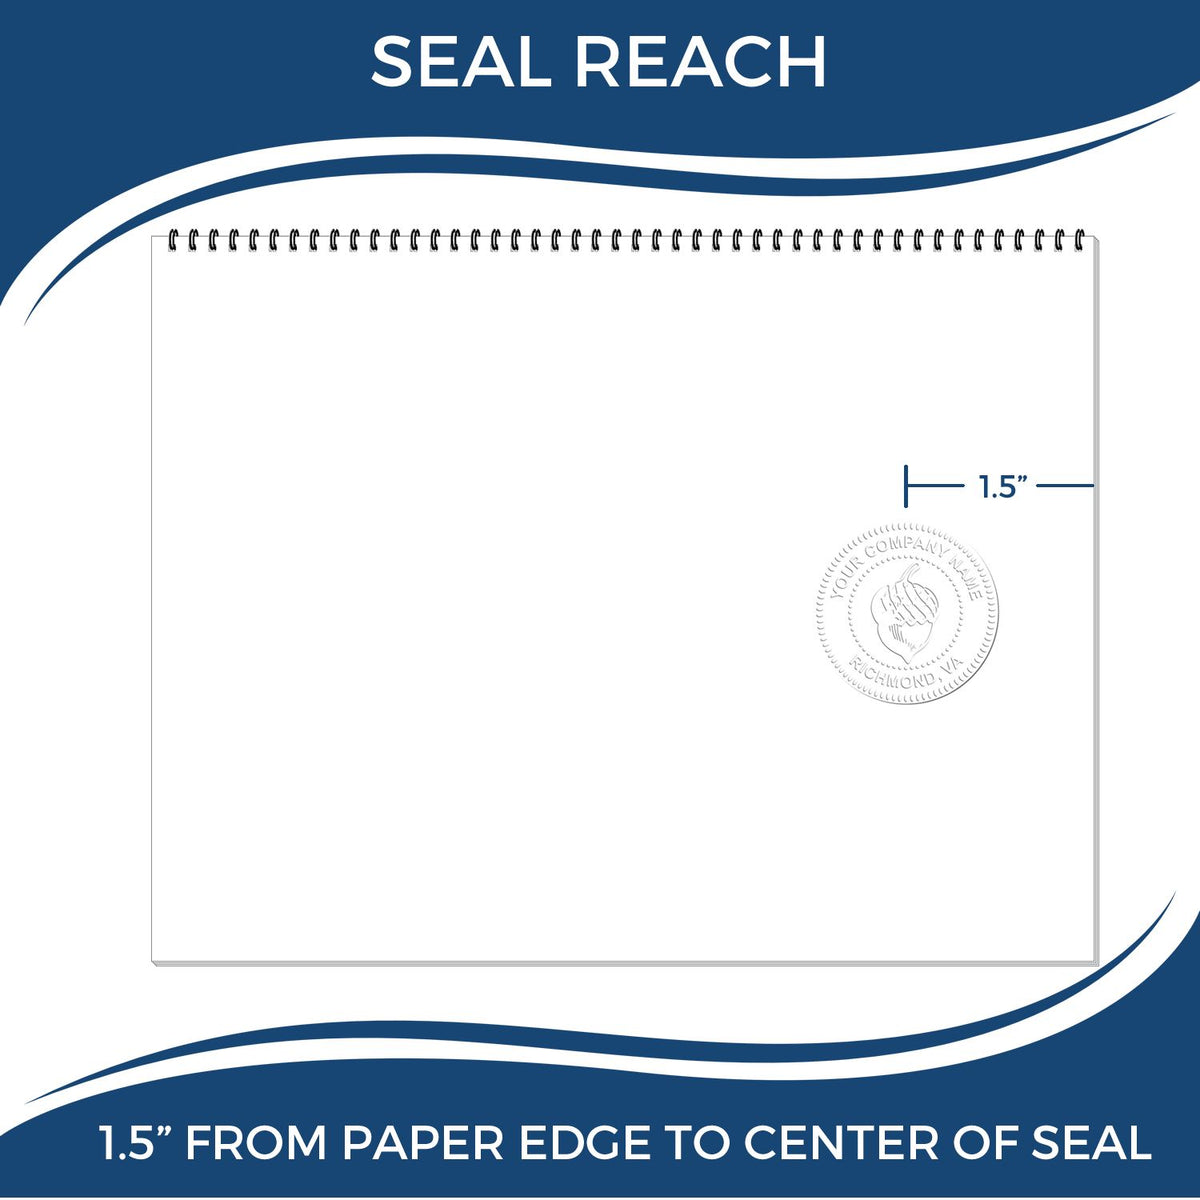 An infographic showing the seal reach which is represented by a ruler and a miniature seal image of the Hybrid Wyoming Land Surveyor Seal